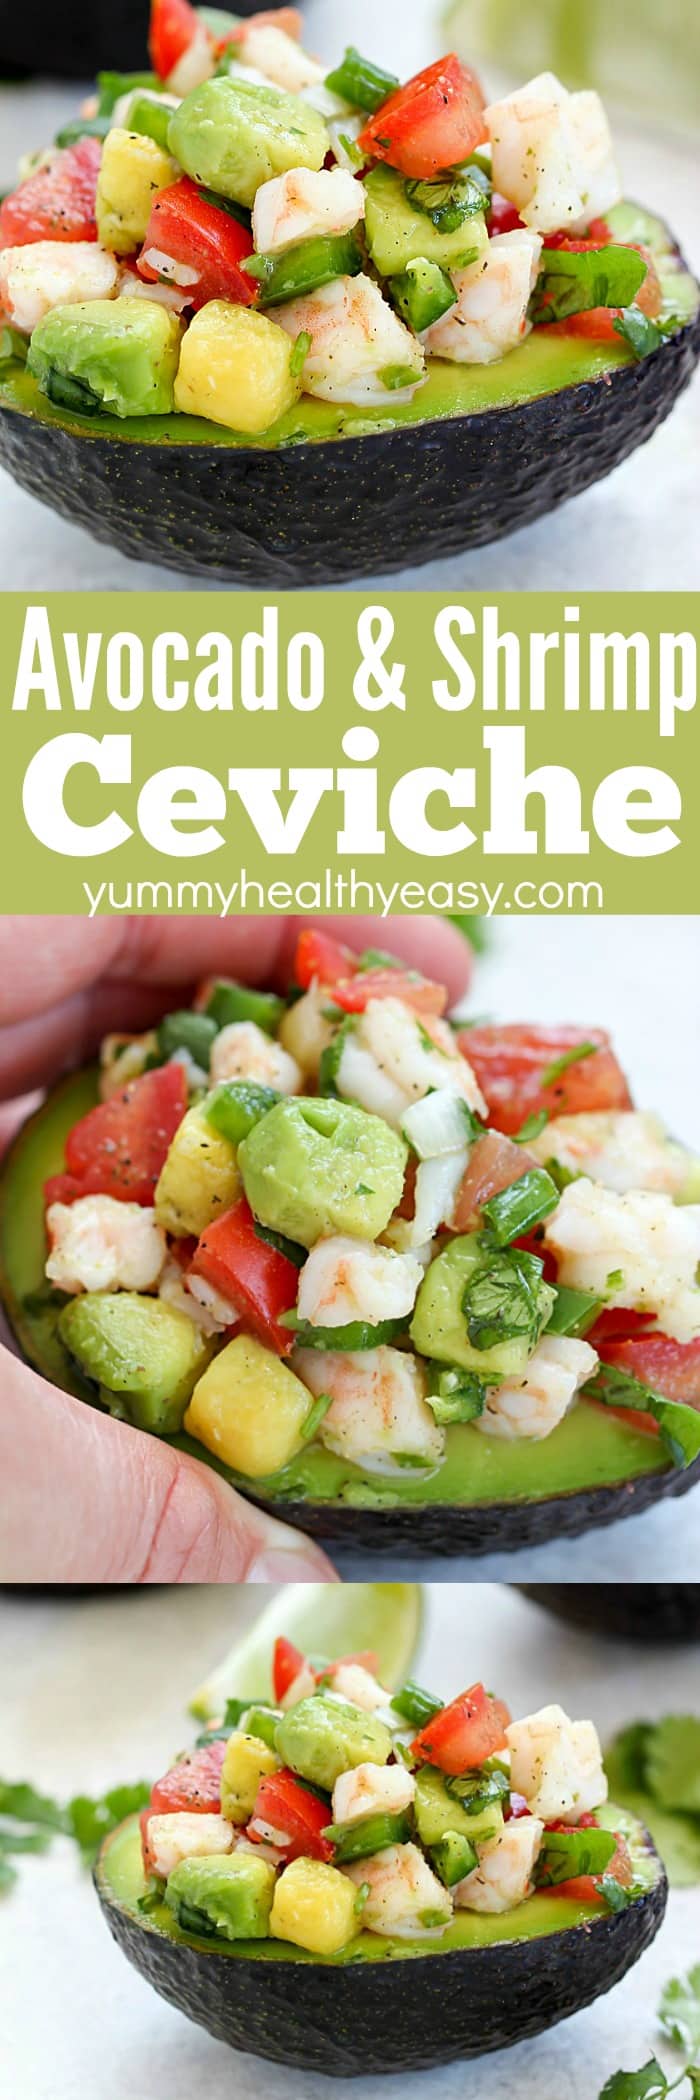 Avocado Shrimp Ceviche Recipe is served in avocado halves for less carbs. SO fresh and delicious! AD